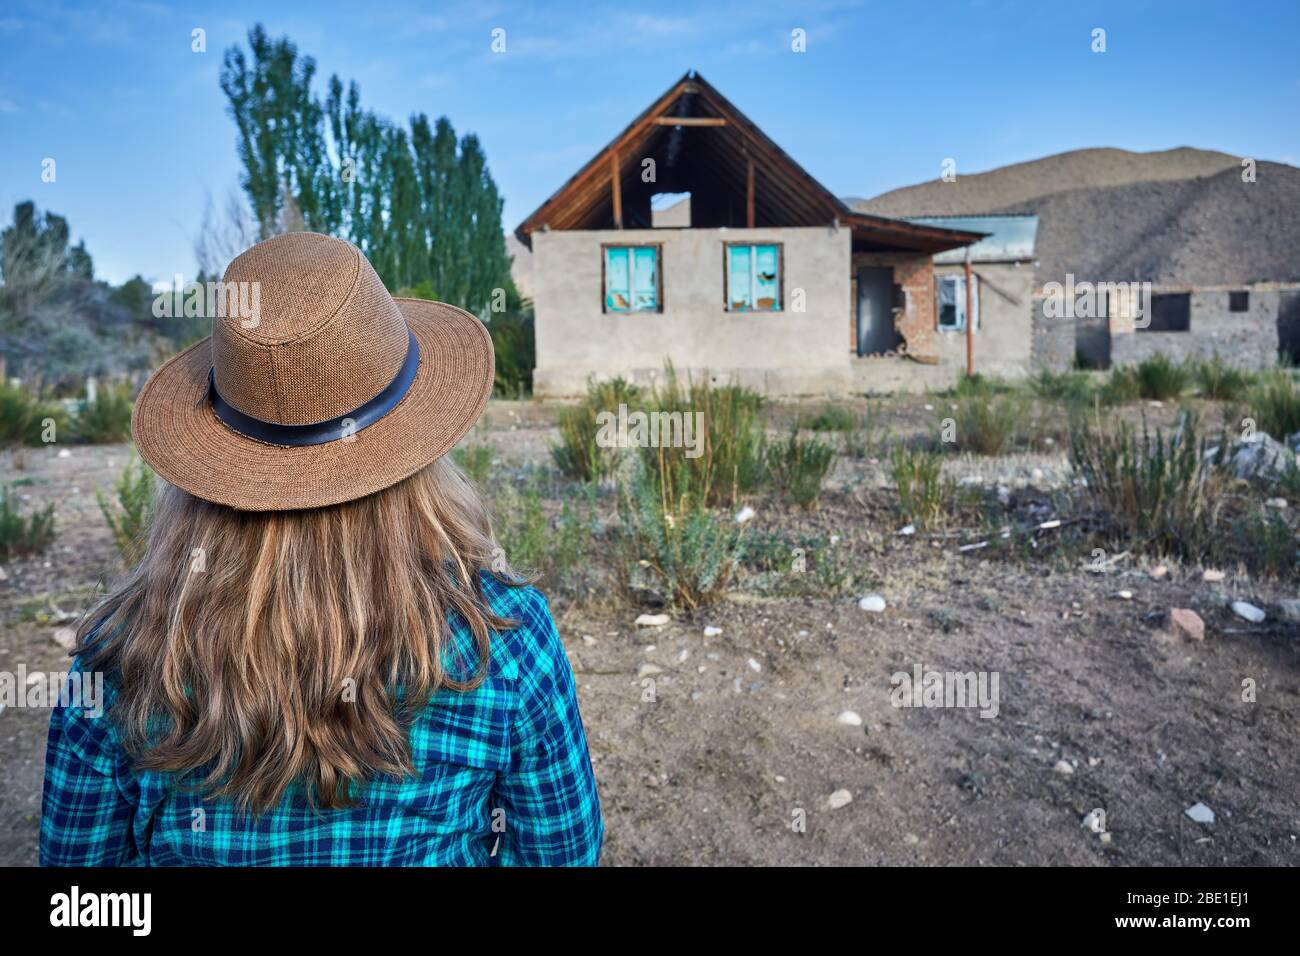 Woman in hat and checked shirt looking at ruined old house in the village Stock Photo